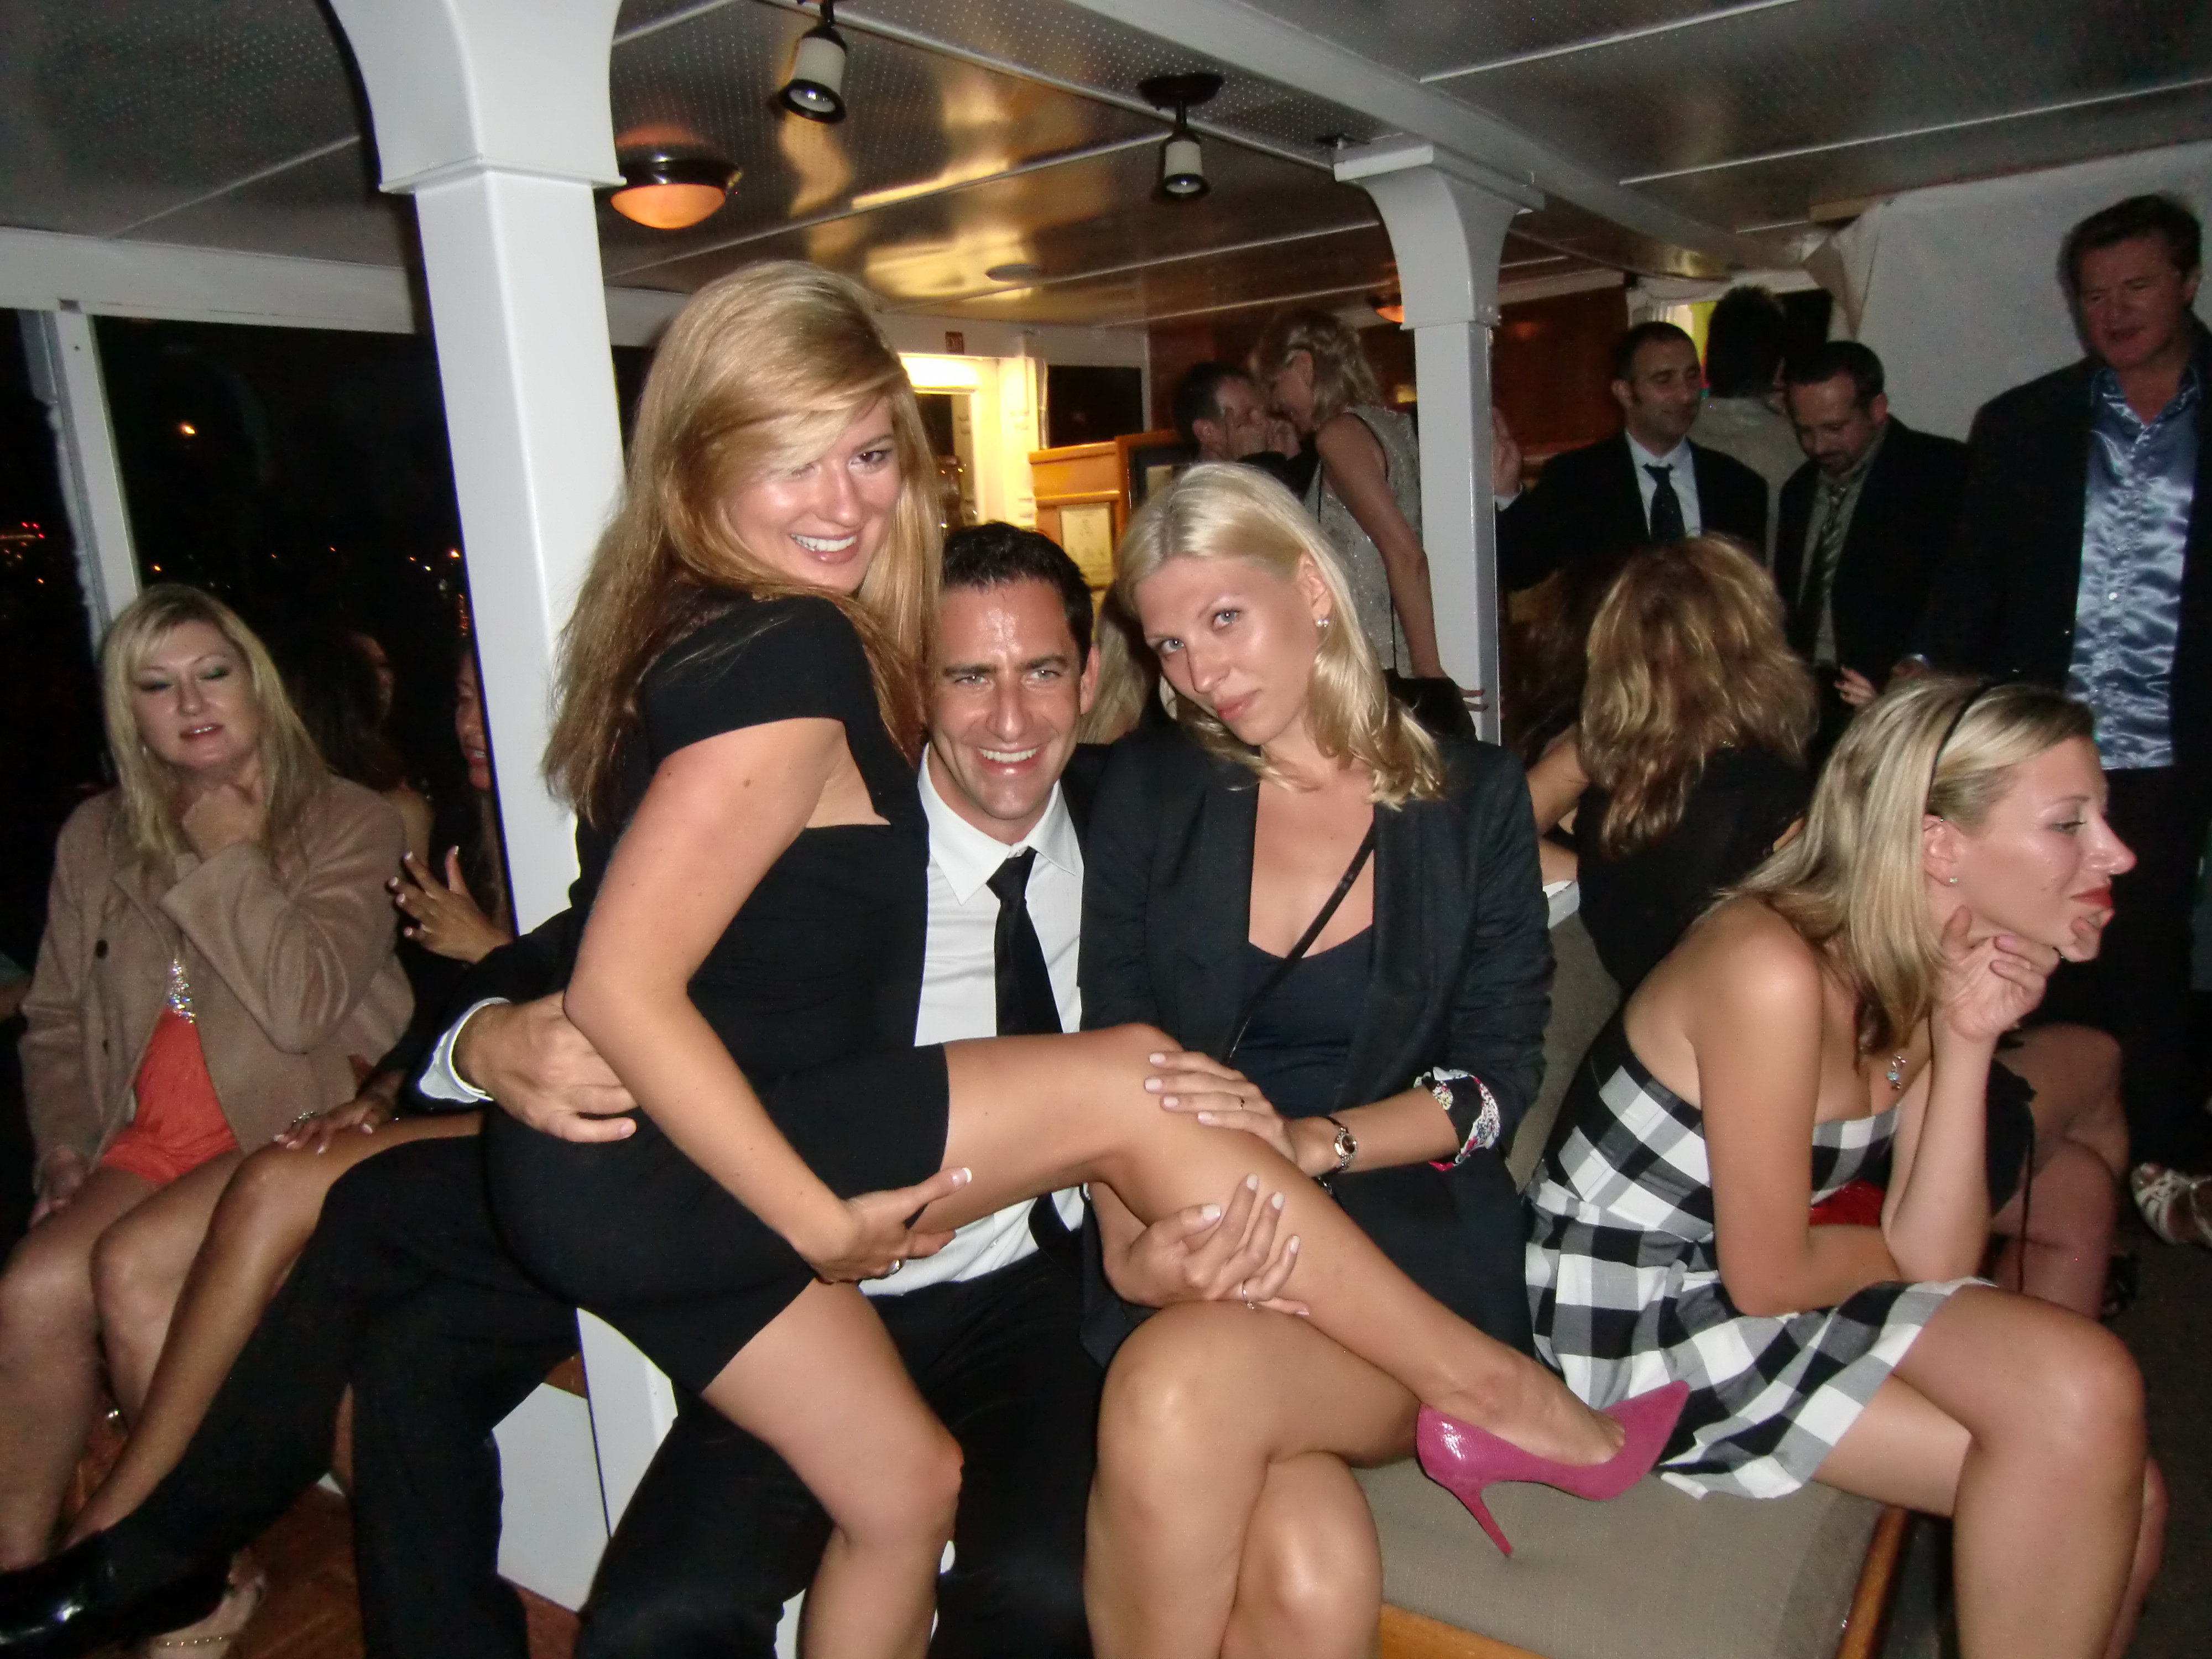 Granny yacht orgy part 1 fan pictures